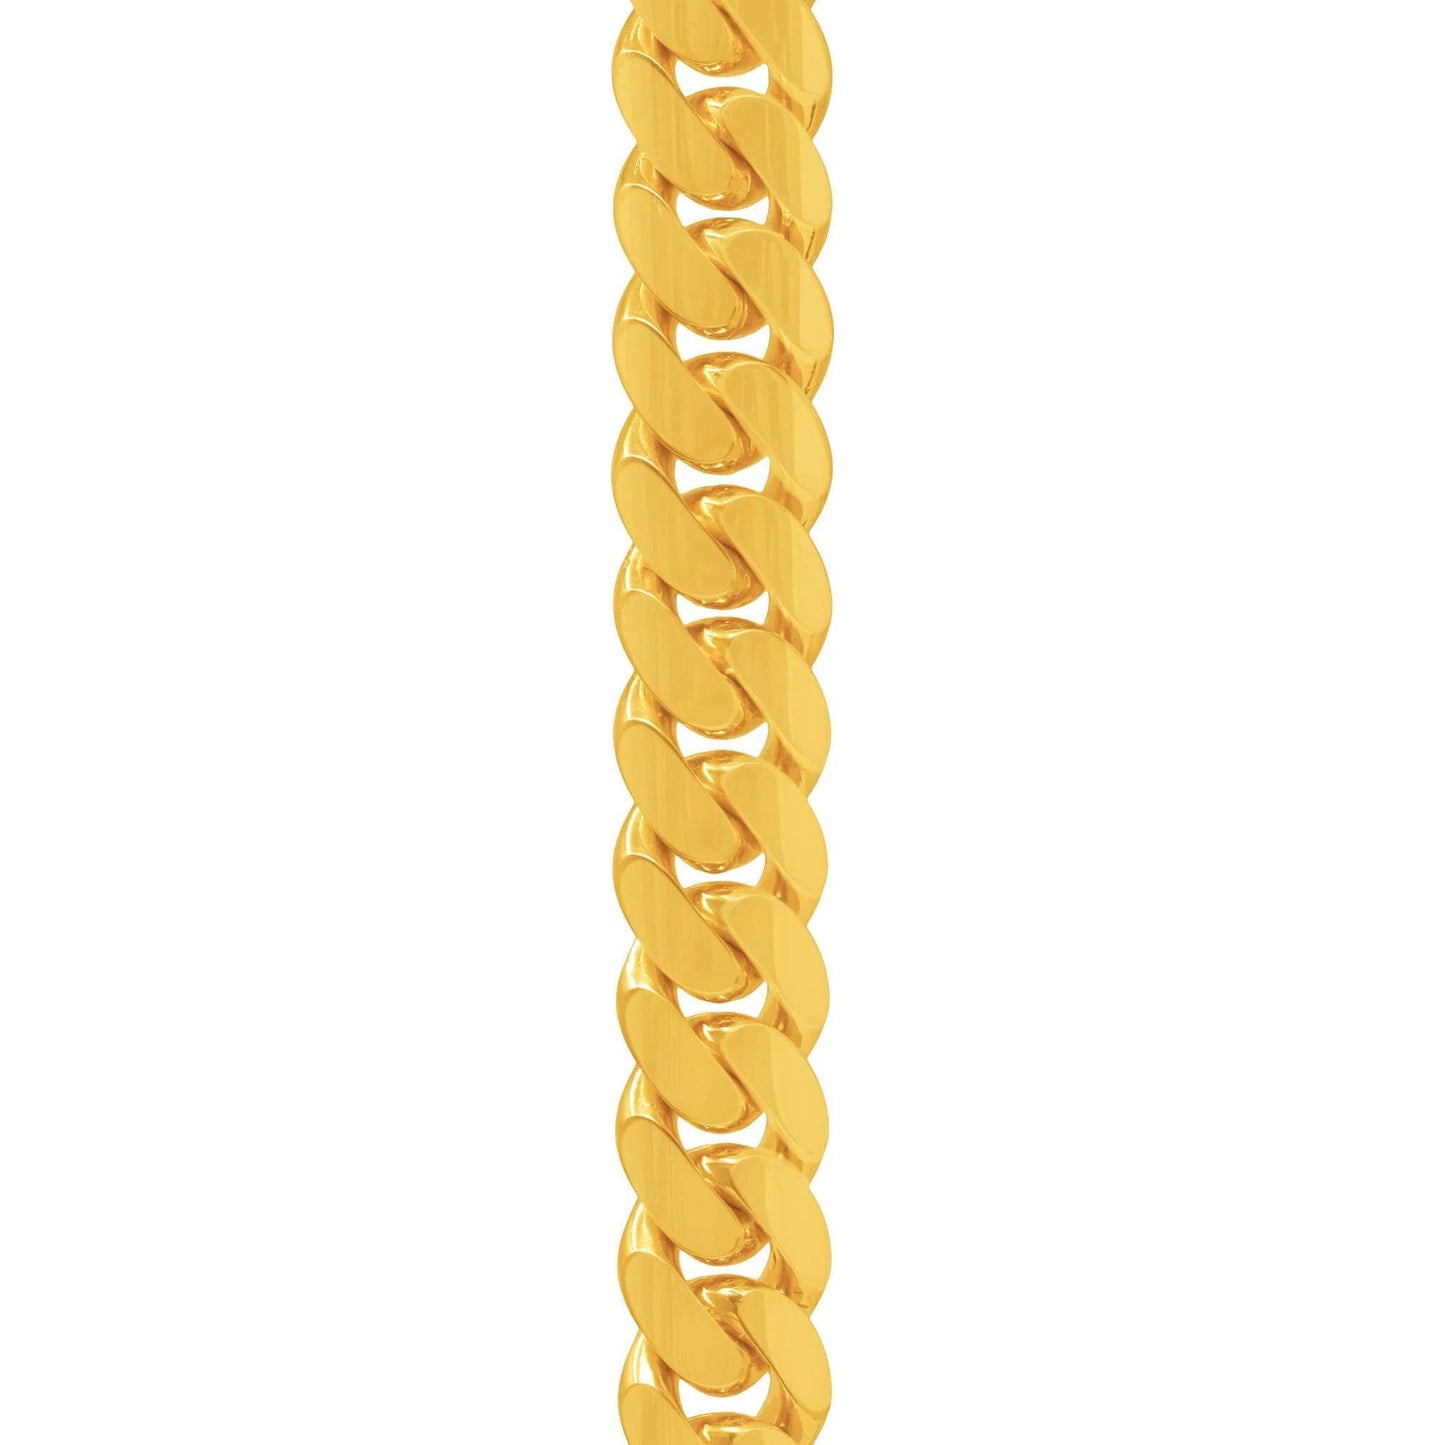 20mm Miami Cuban Link Bracelet in 14K Solid Yellow Gold - Vera Jewelry in Miami